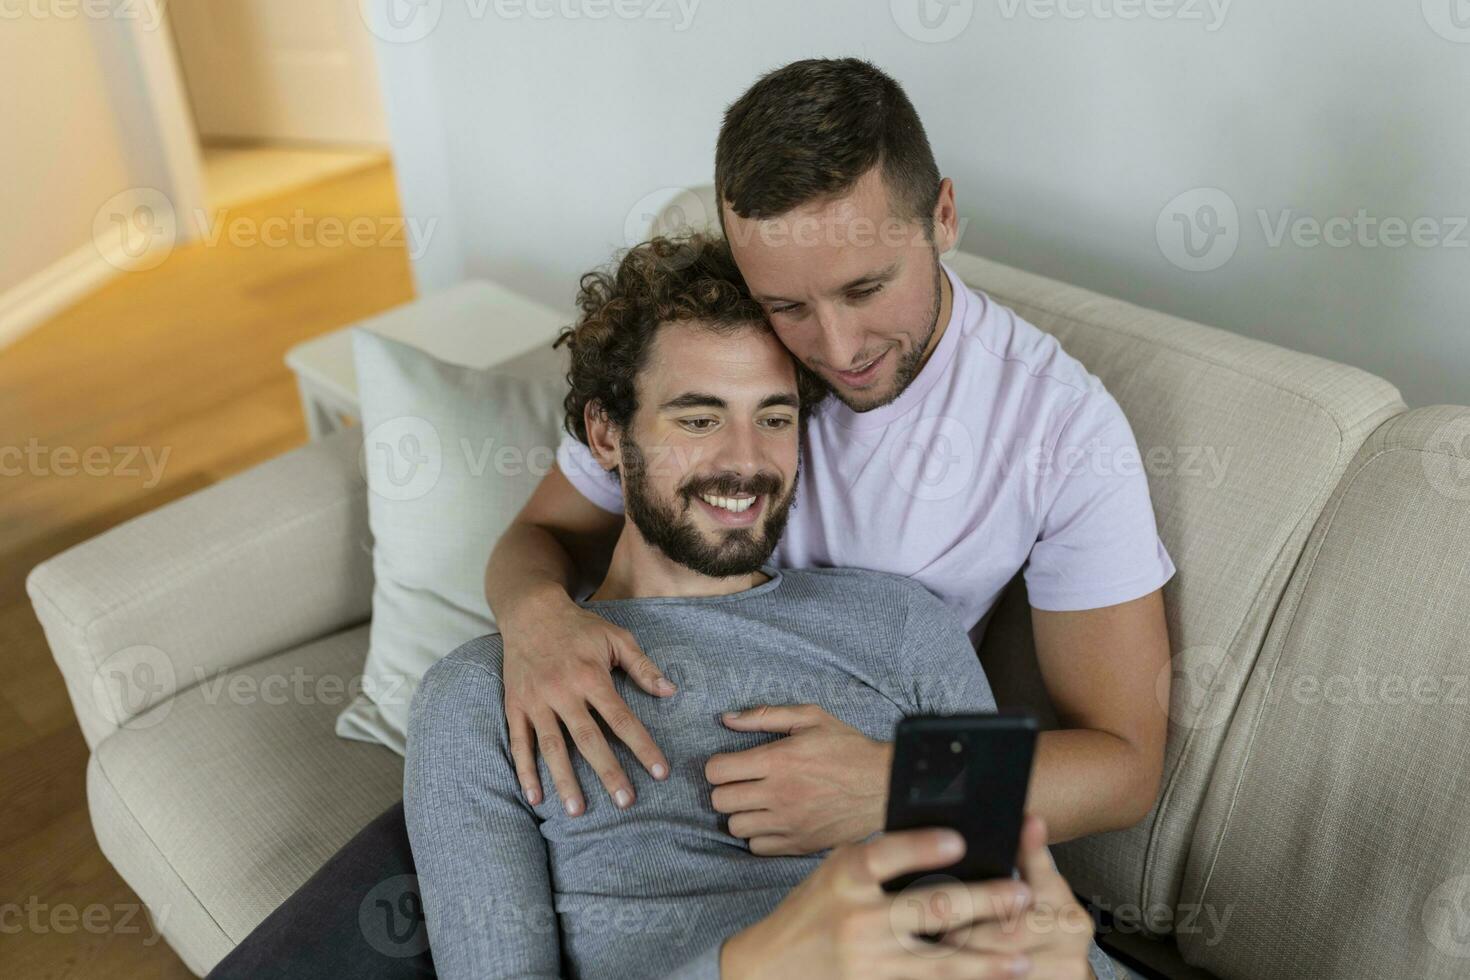 Cute young gay couple video calling their friends in their living room at home. Two male lovers smiling cheerfully while greeting their friends on a smartphone. Young gay couple sitting together. photo